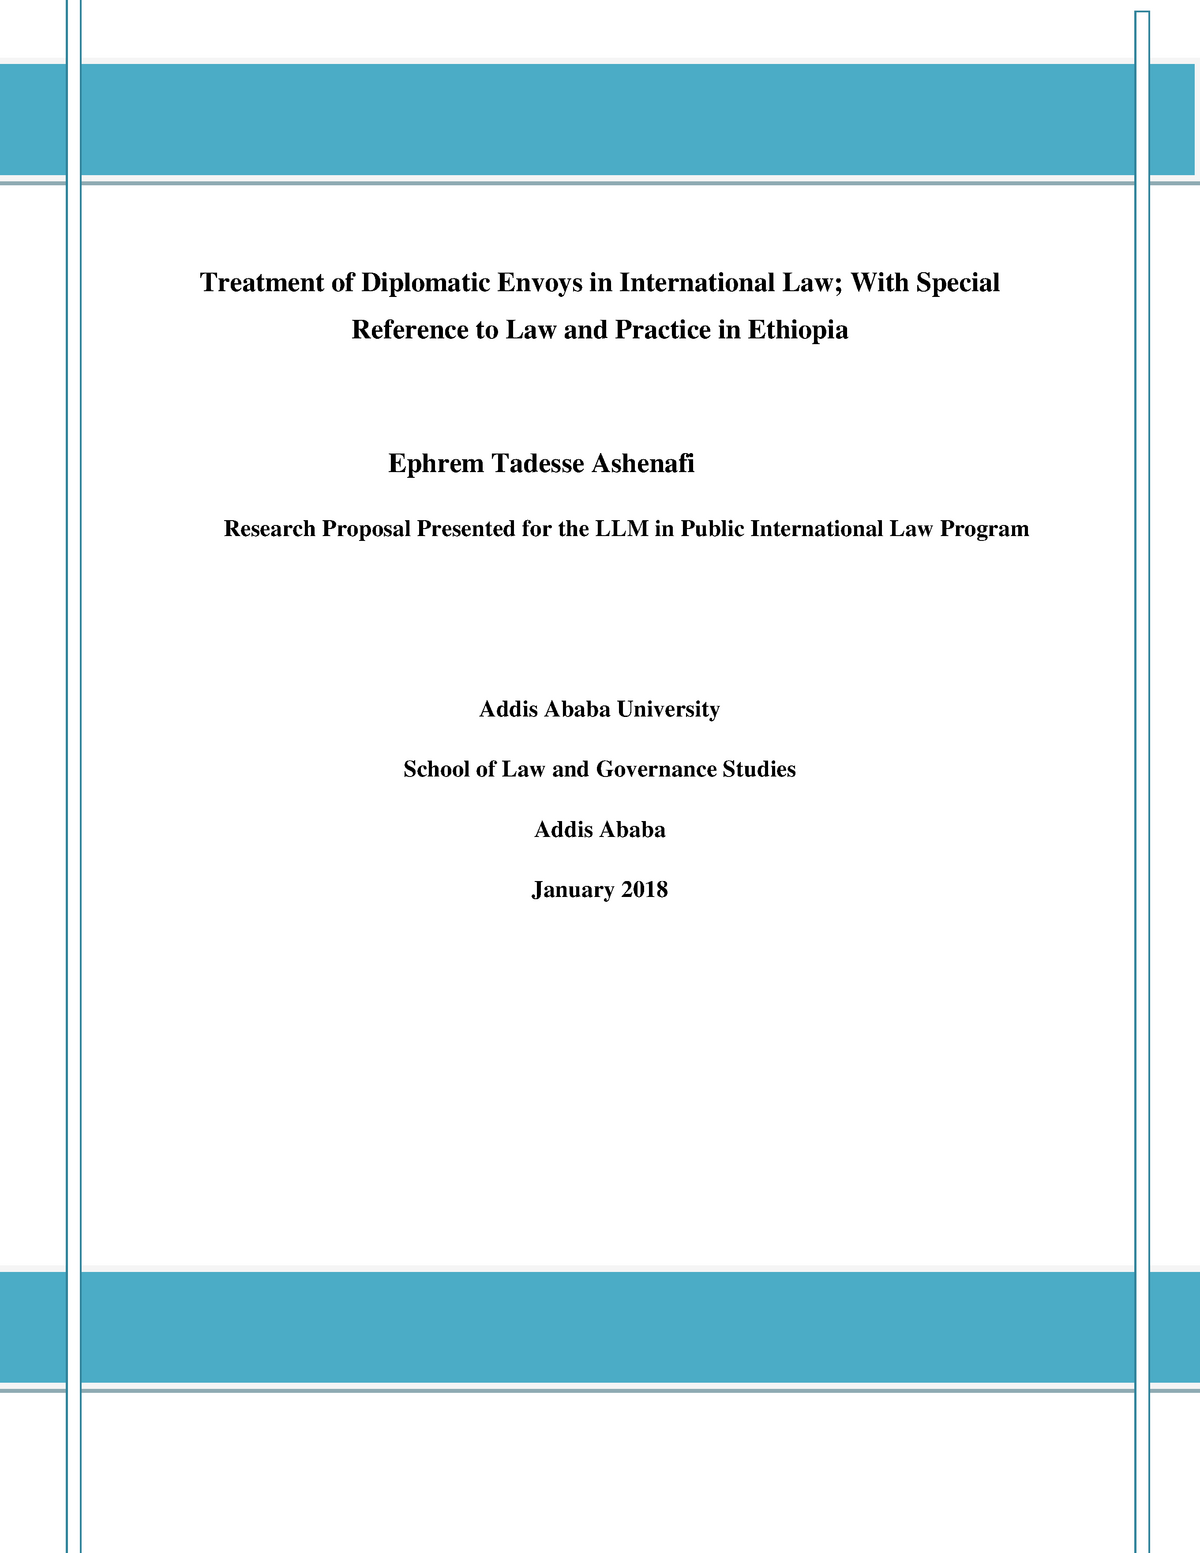 sample research proposal in ethiopia pdf